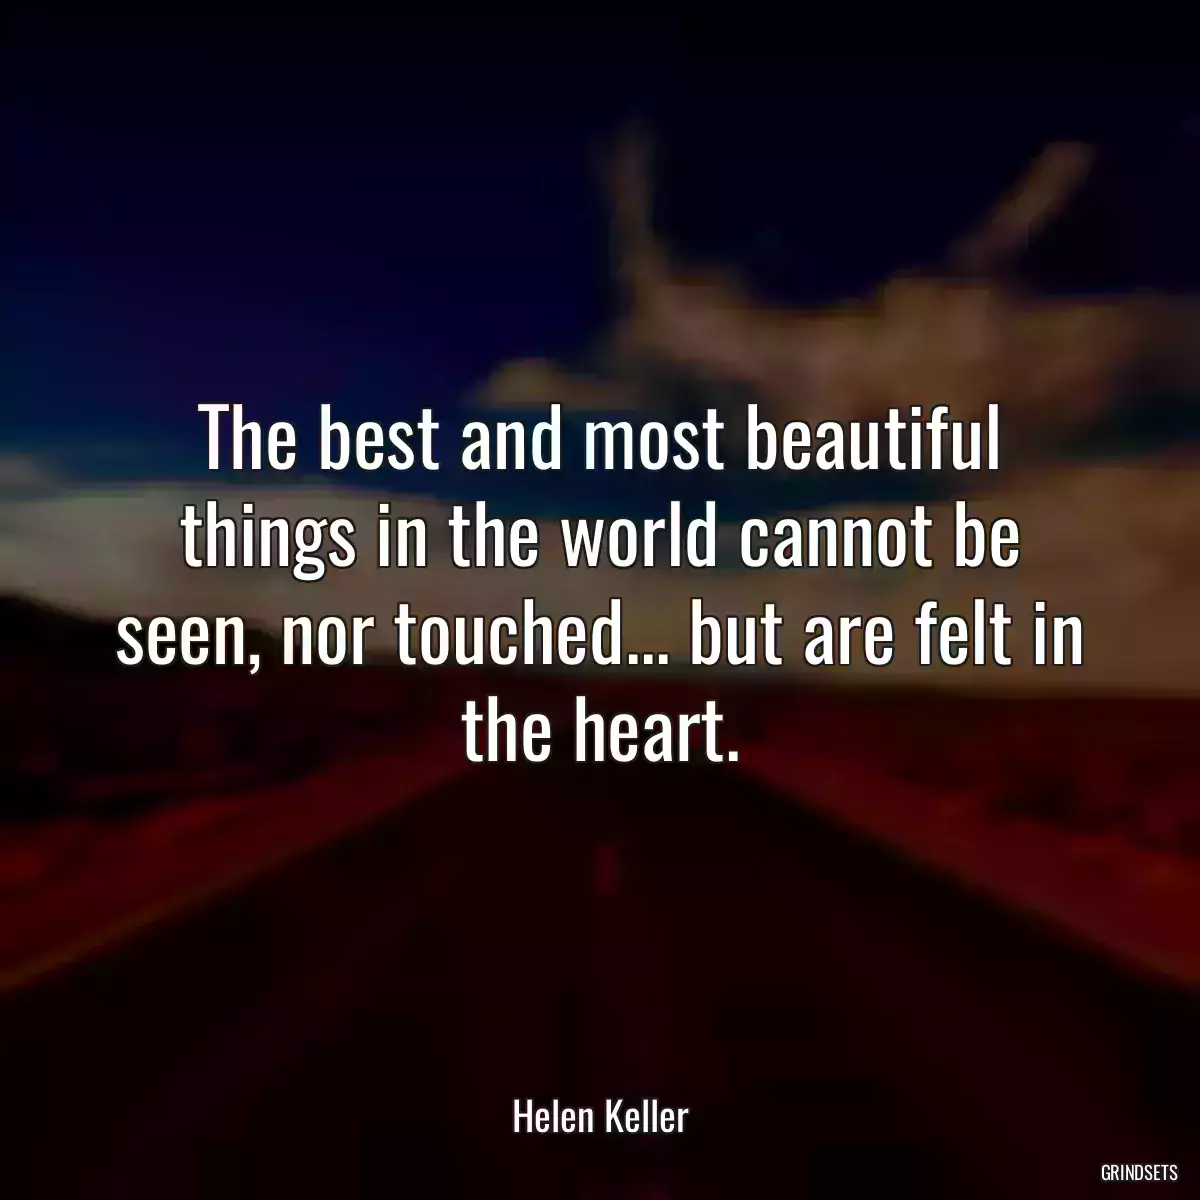 The best and most beautiful things in the world cannot be seen, nor touched... but are felt in the heart.